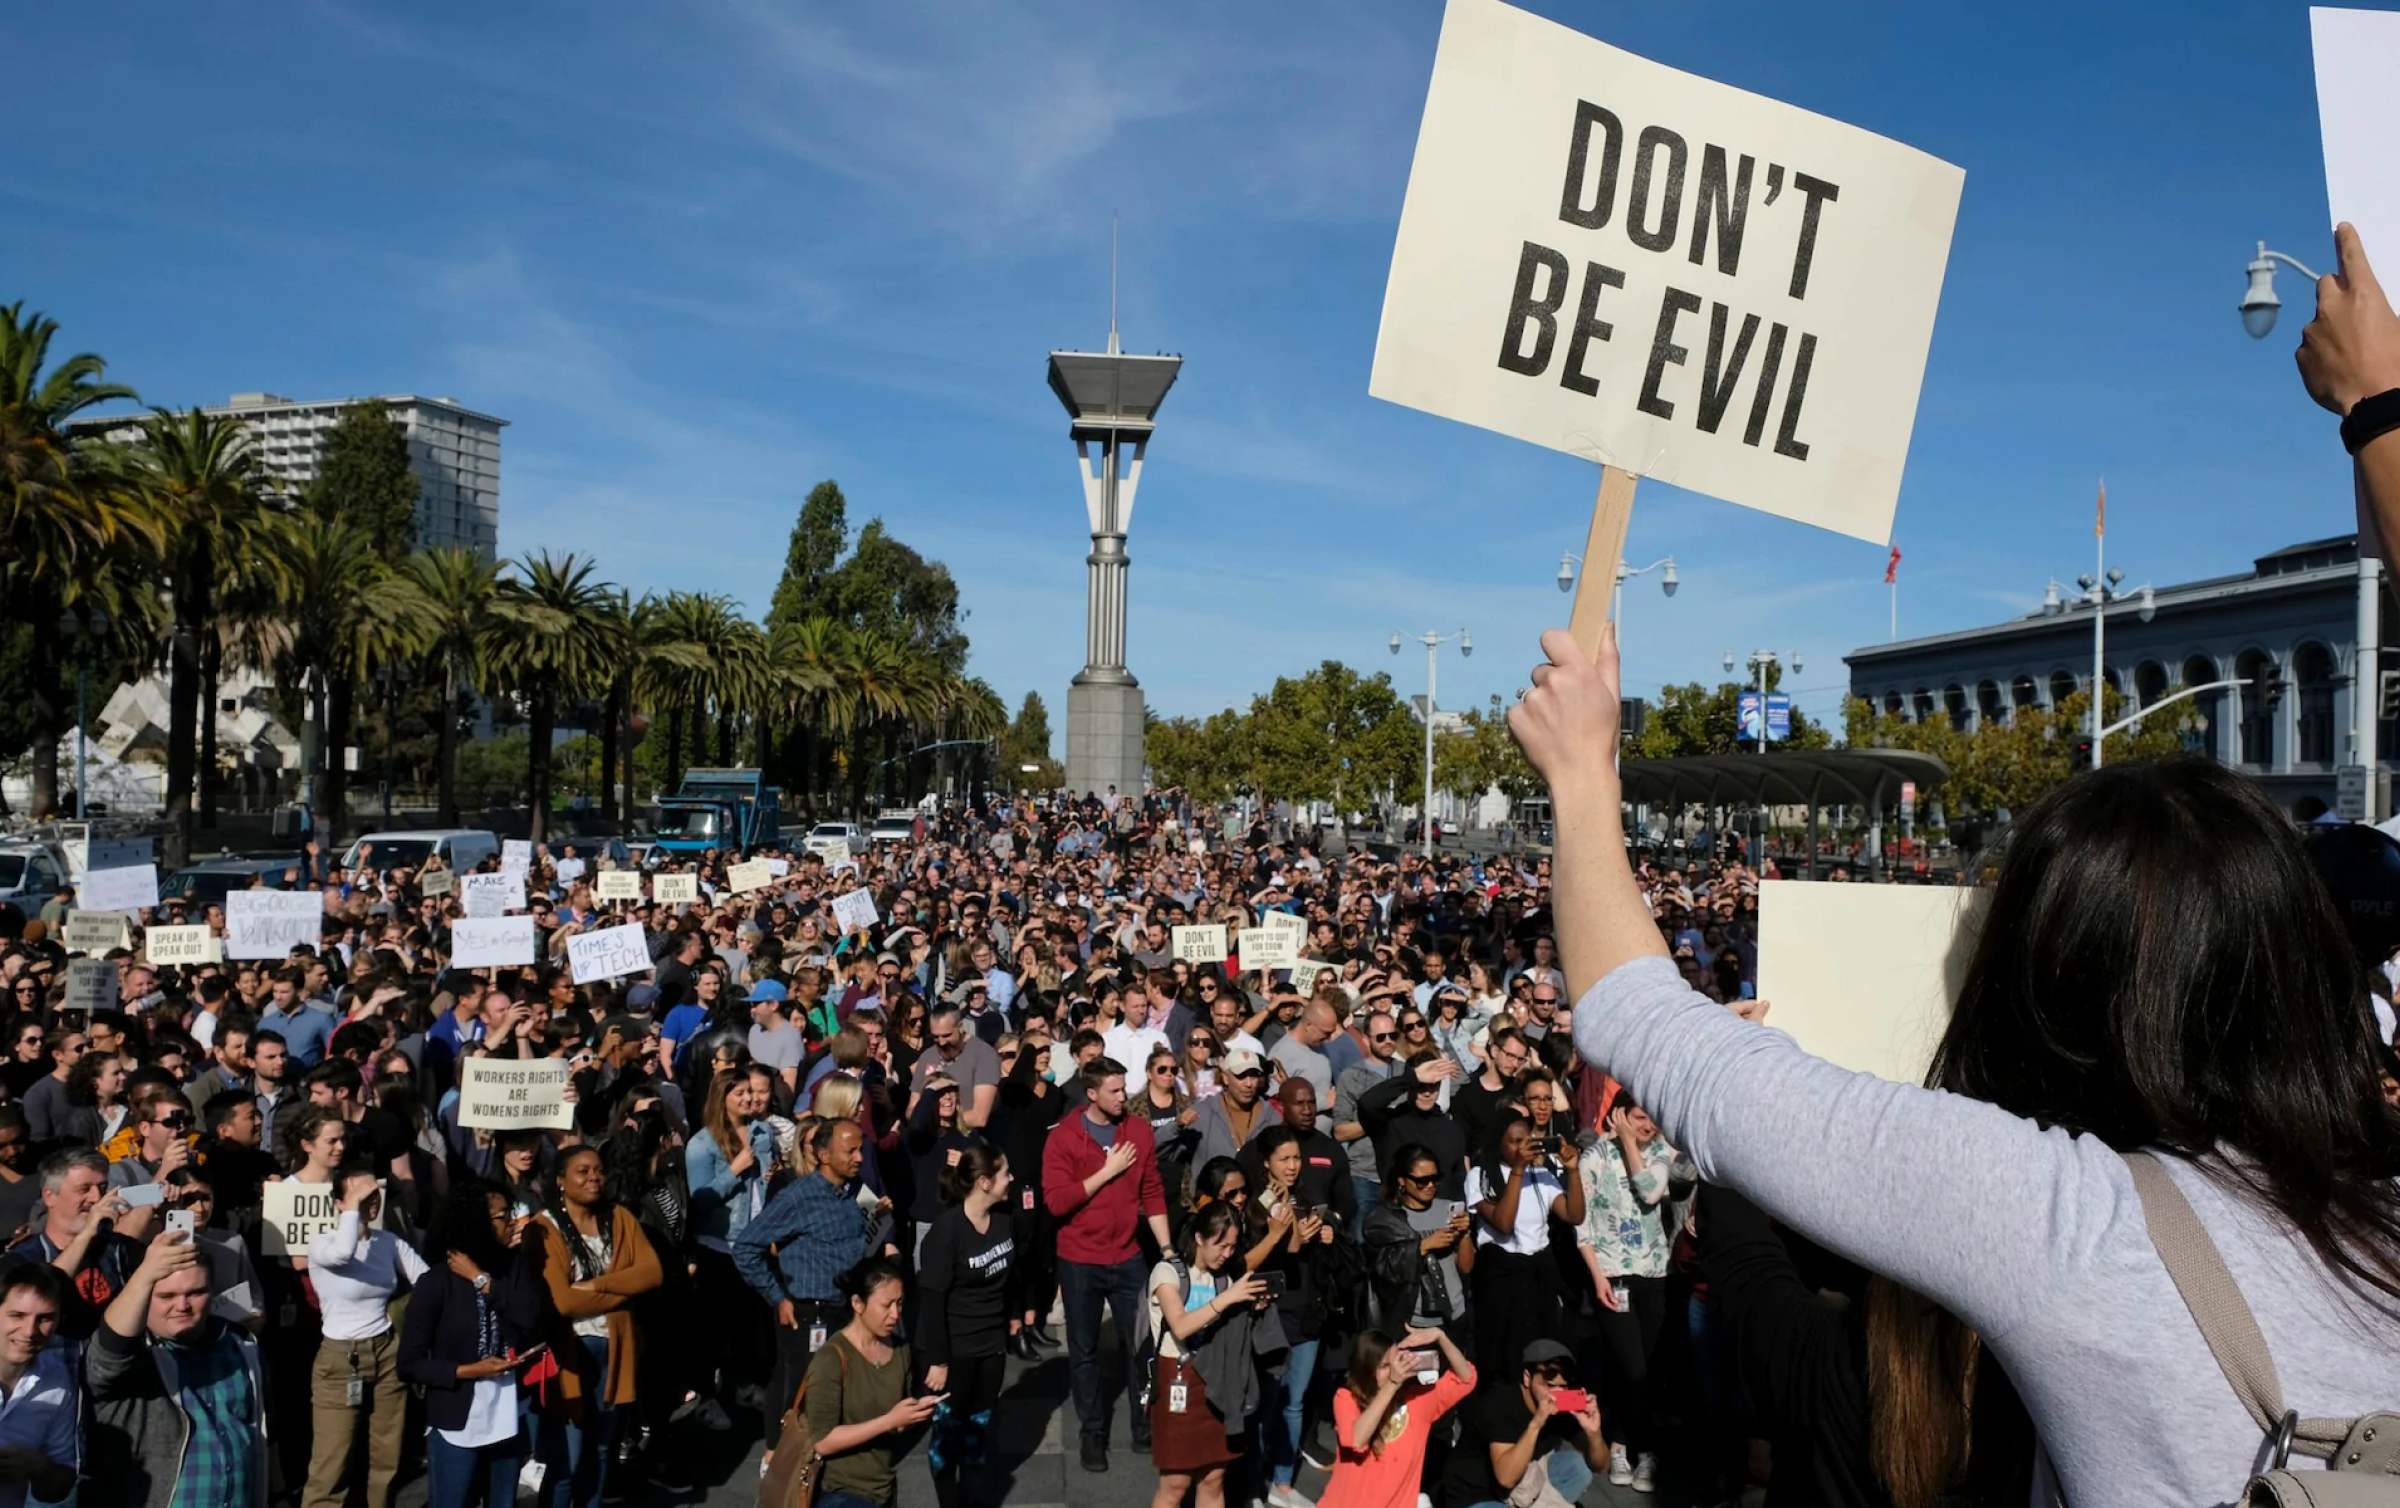 Walkouts, unions, and grassroots campaigns are some of the ways tech workers are provoking change. Photo: Eric Risberg/AP